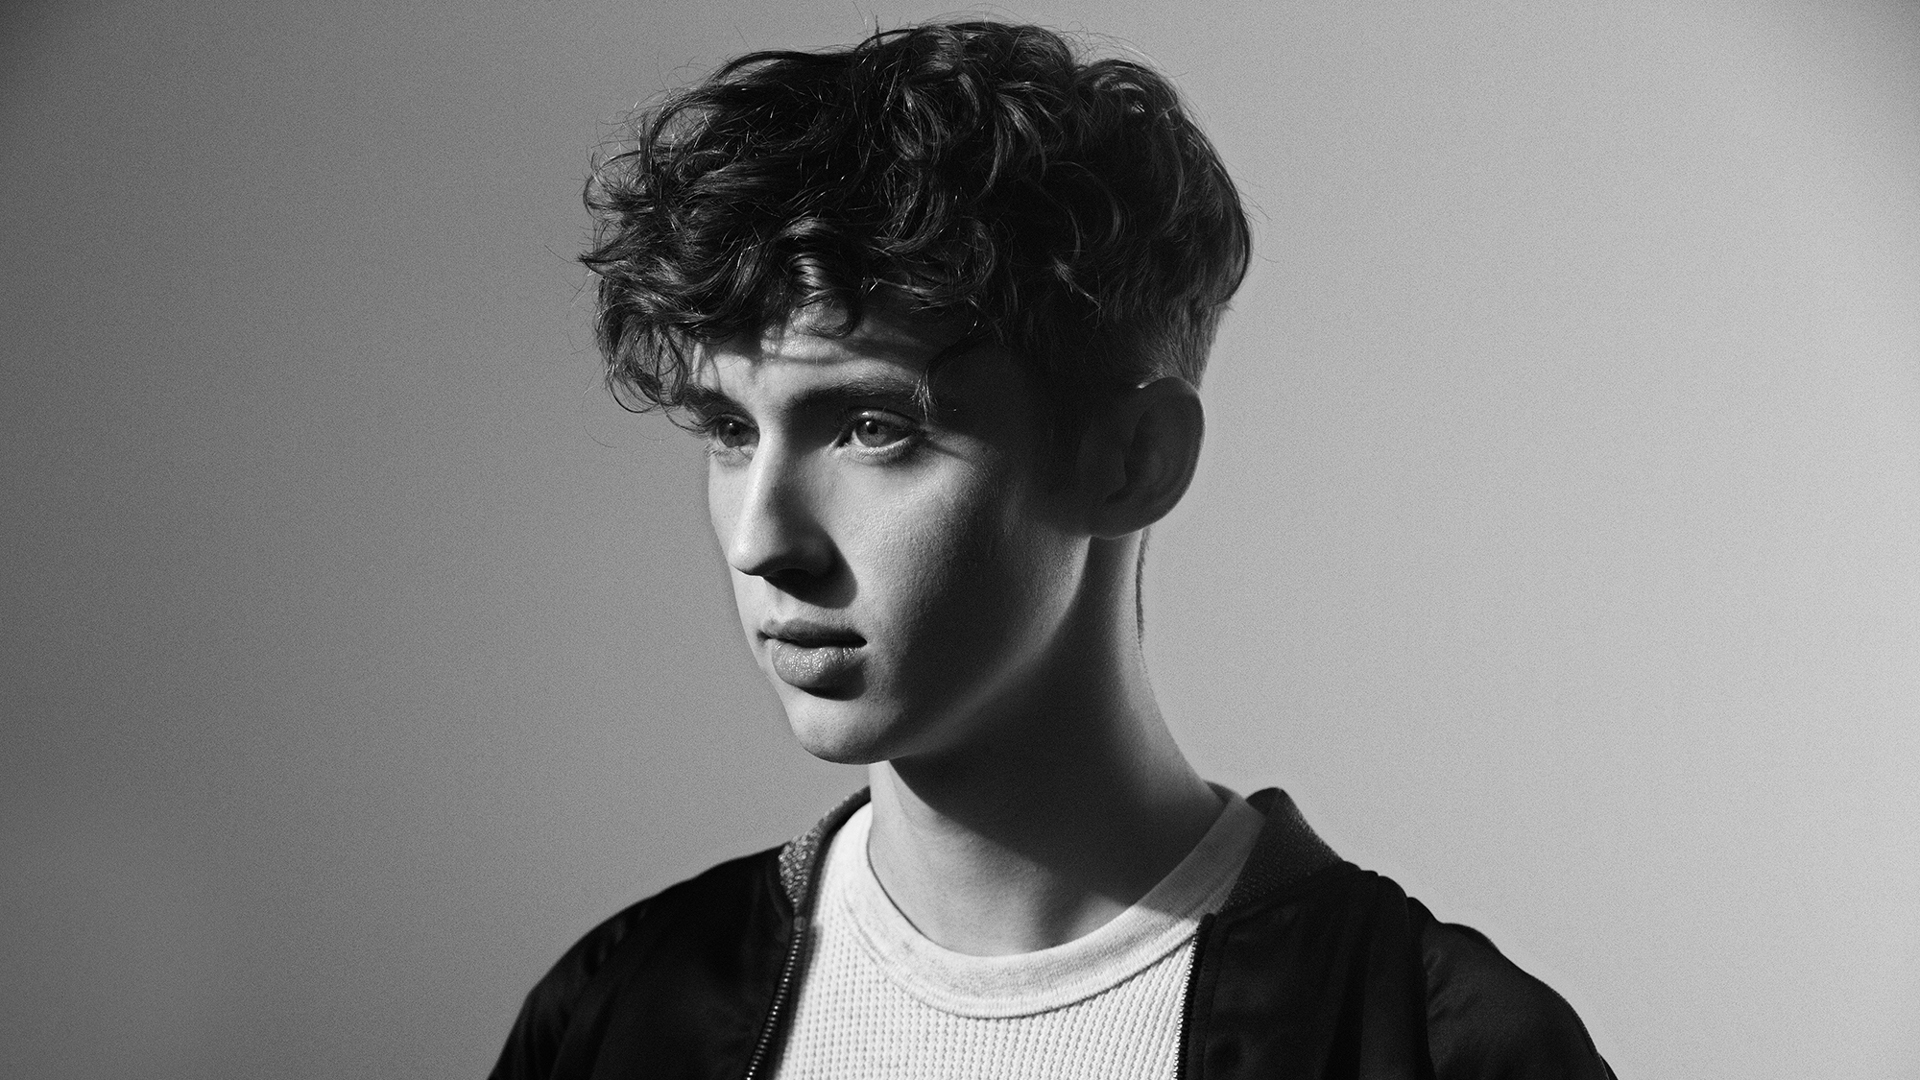 Troye Sivan Wallpaper Image Photos Pictures Background